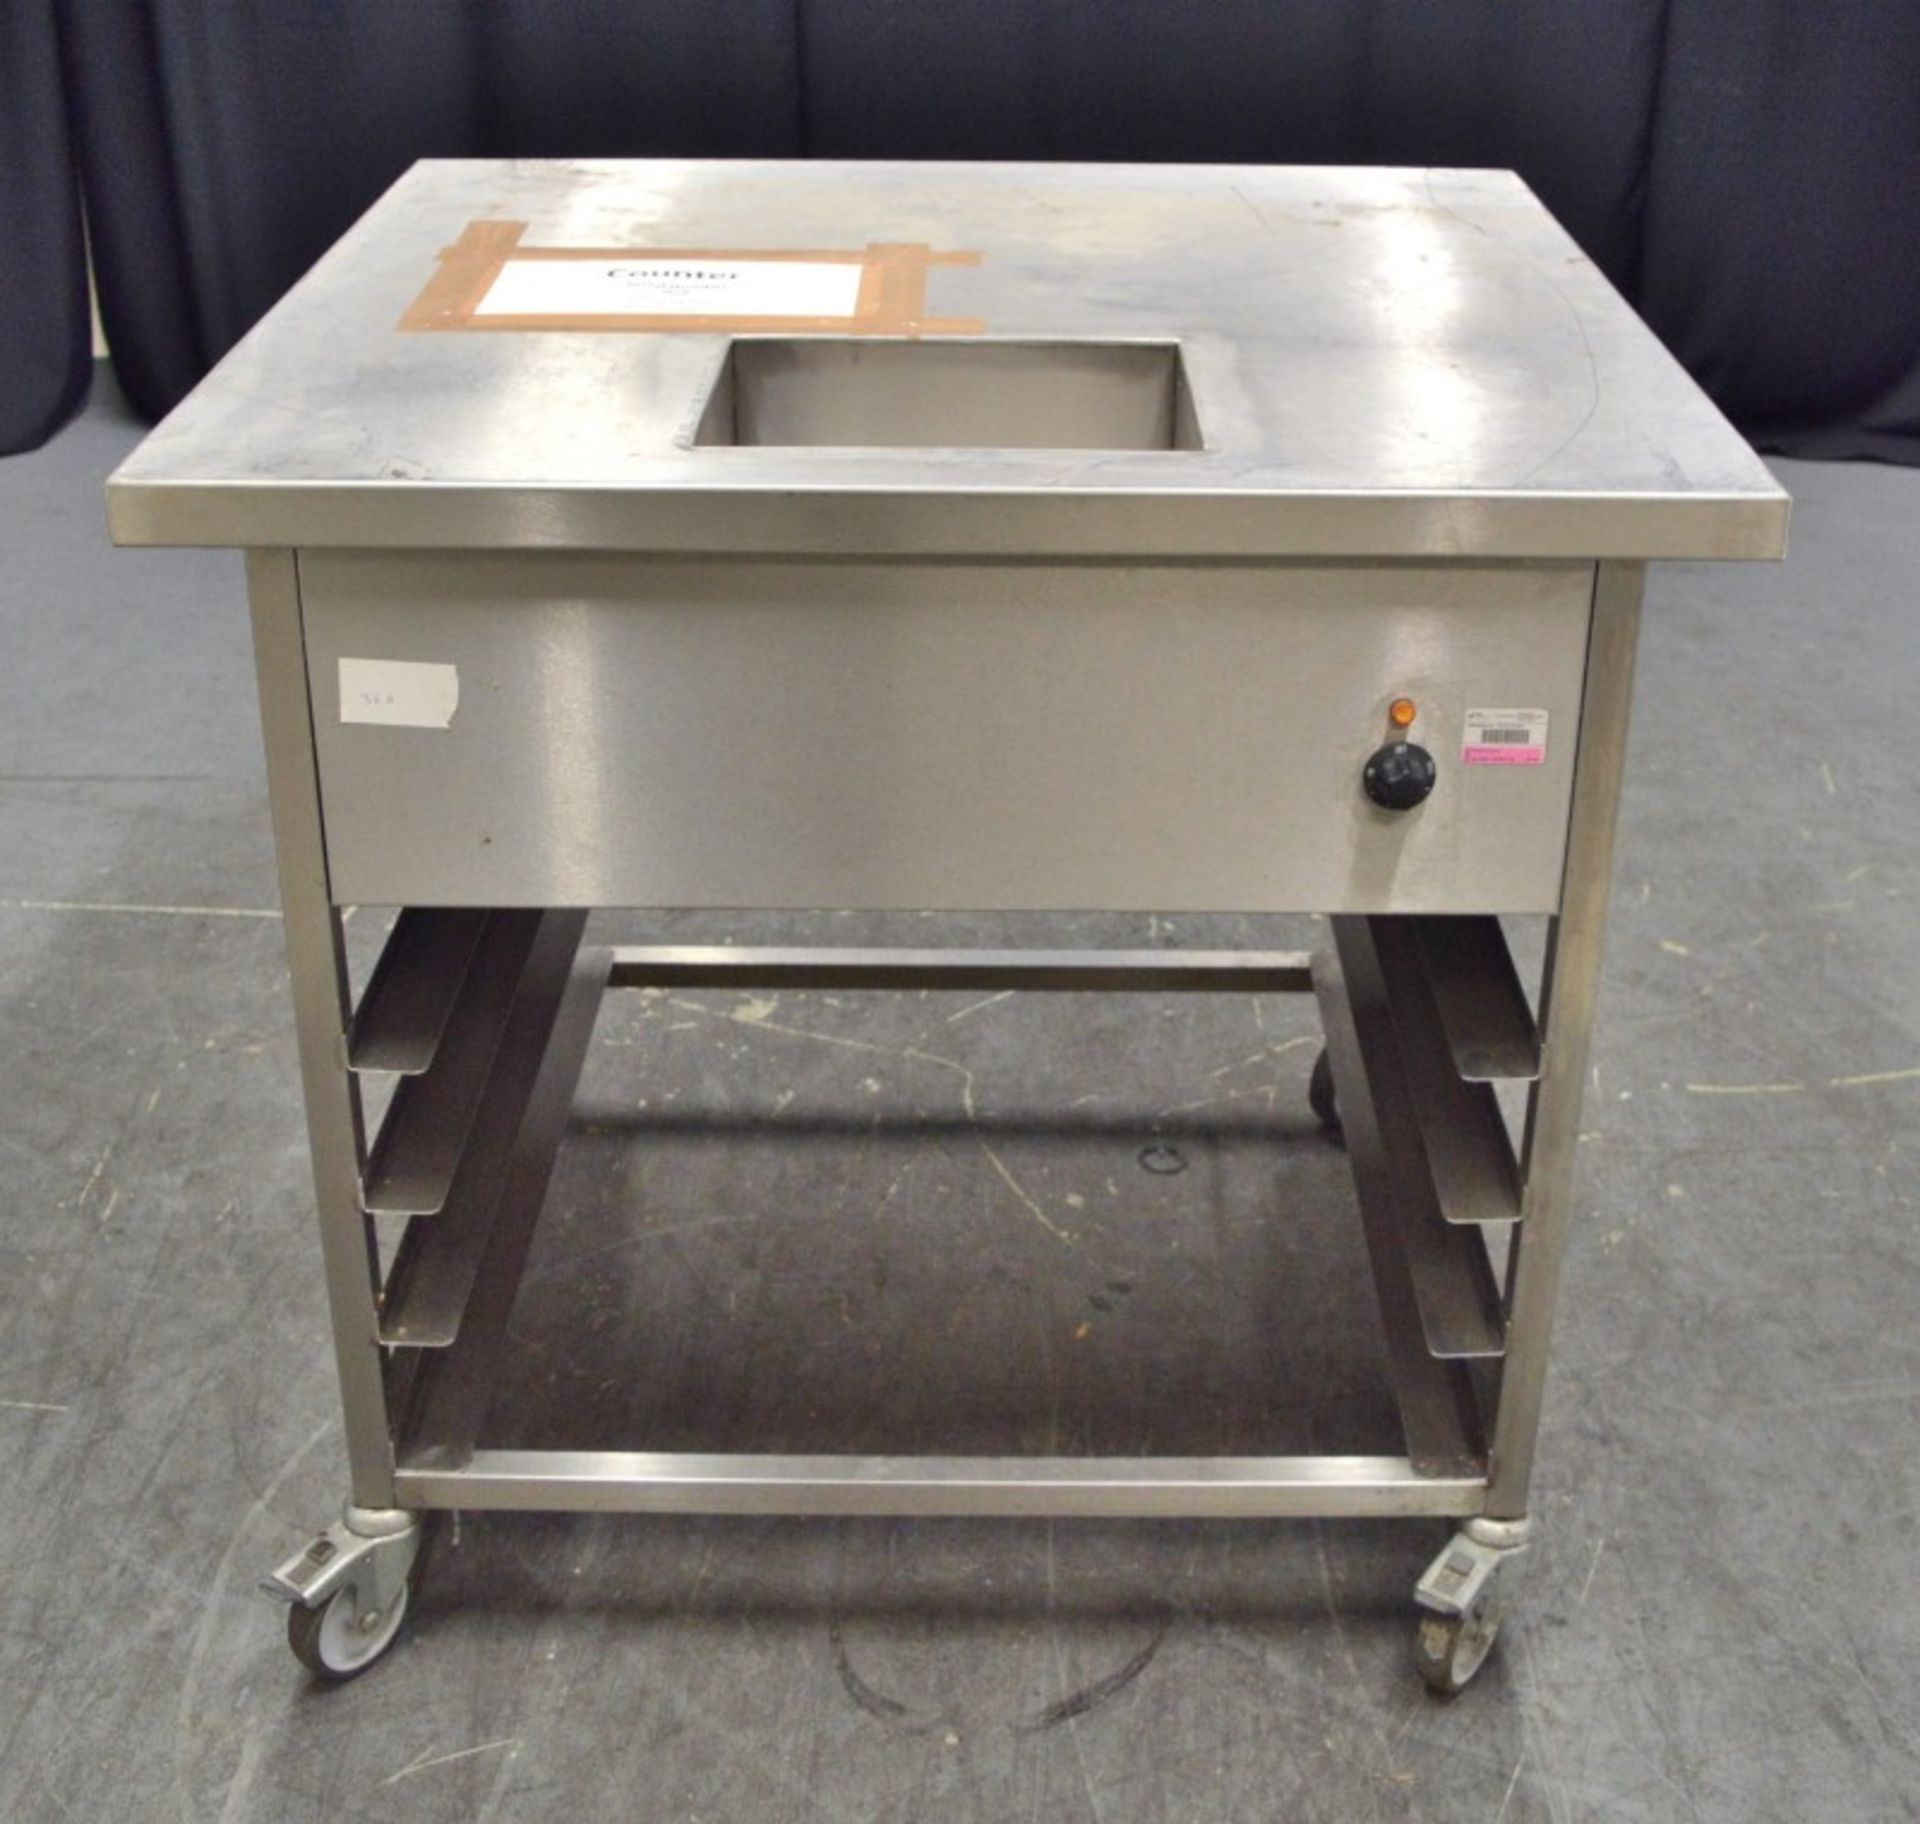 Stainless Steel worktop with heating element - 980 x 900 x 900